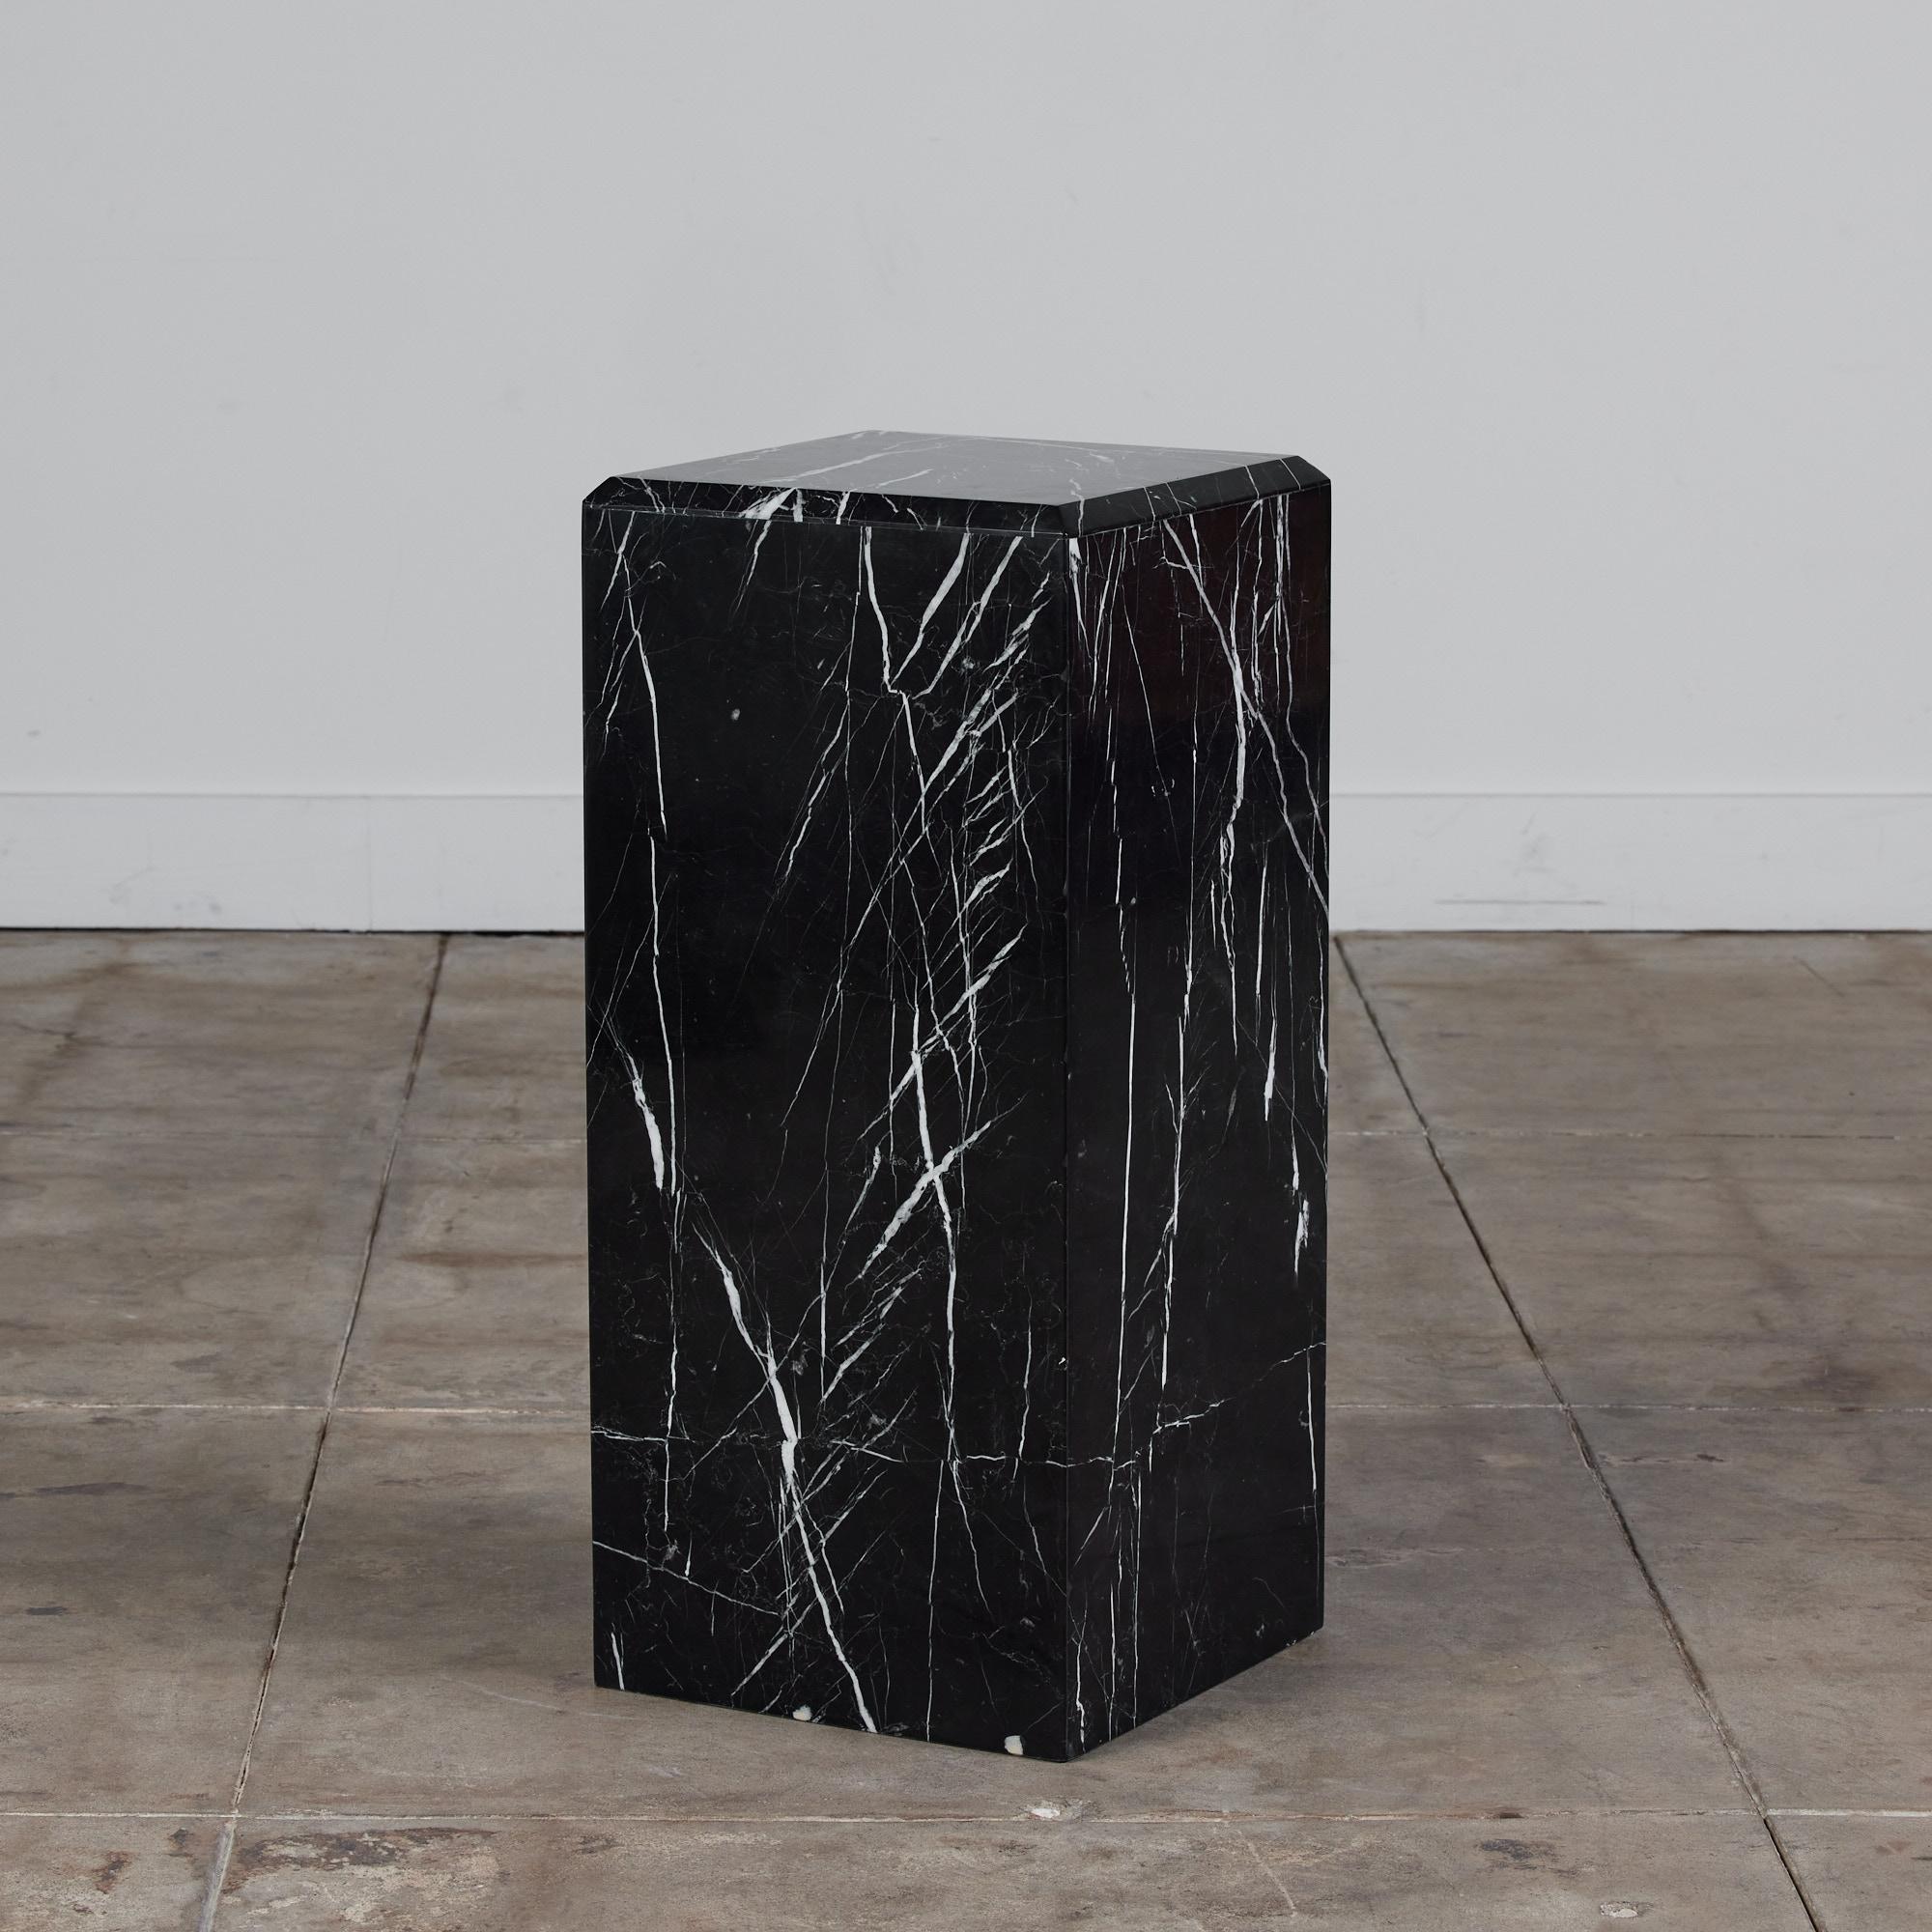 Stone pedestal in a stunning Italian Nero Marquina marble with white veining in the style of Angelo Mangiarotti. This timeless piece can be a sculptural piece of art or it can beautifully display an object upon its surface. The column pedestal